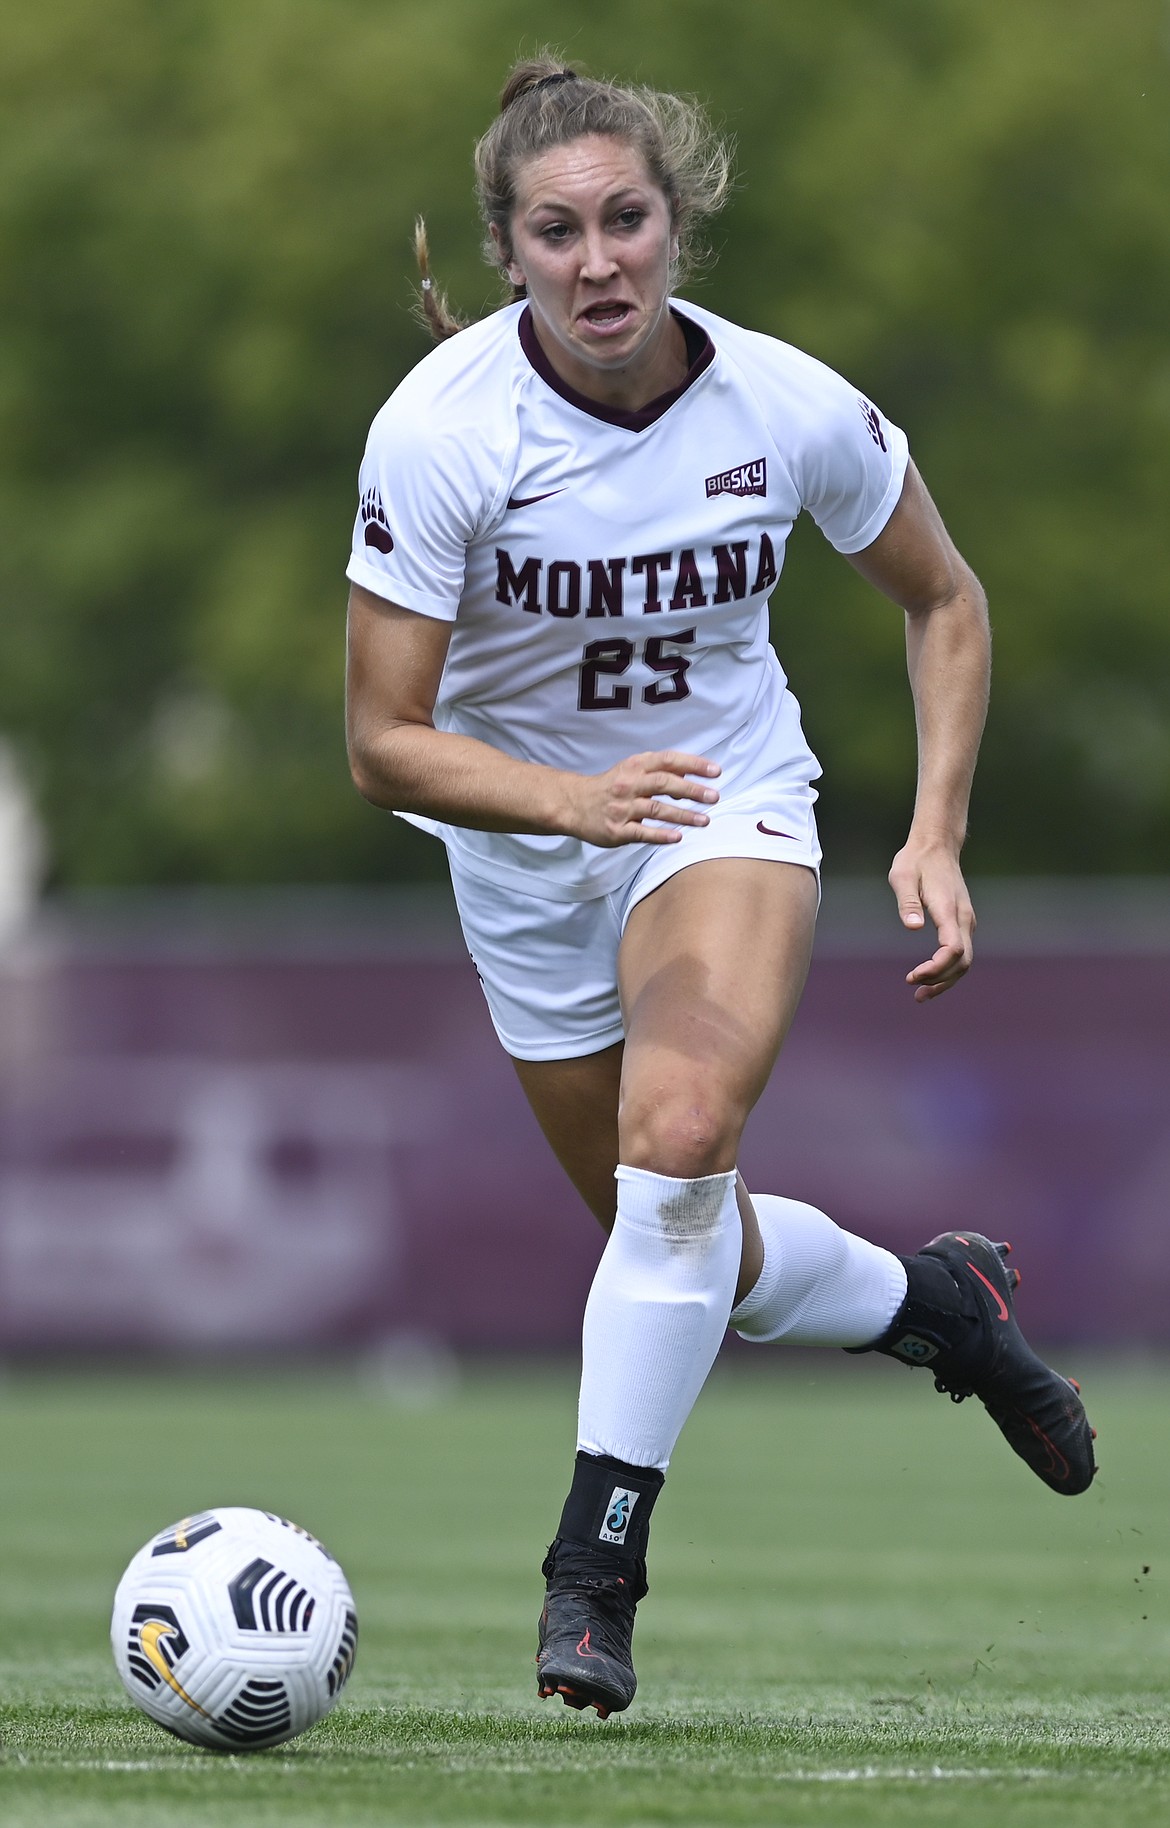 Montana’s Josie Windauer moves the ball up the field against the Portland Pirates on Sunday, Aug. 22, 2021. The Grizzlies fell to the Portland Pilots 1-0 at the South Campus Stadium in Missoula. (Tommy Martino/University of Montana)